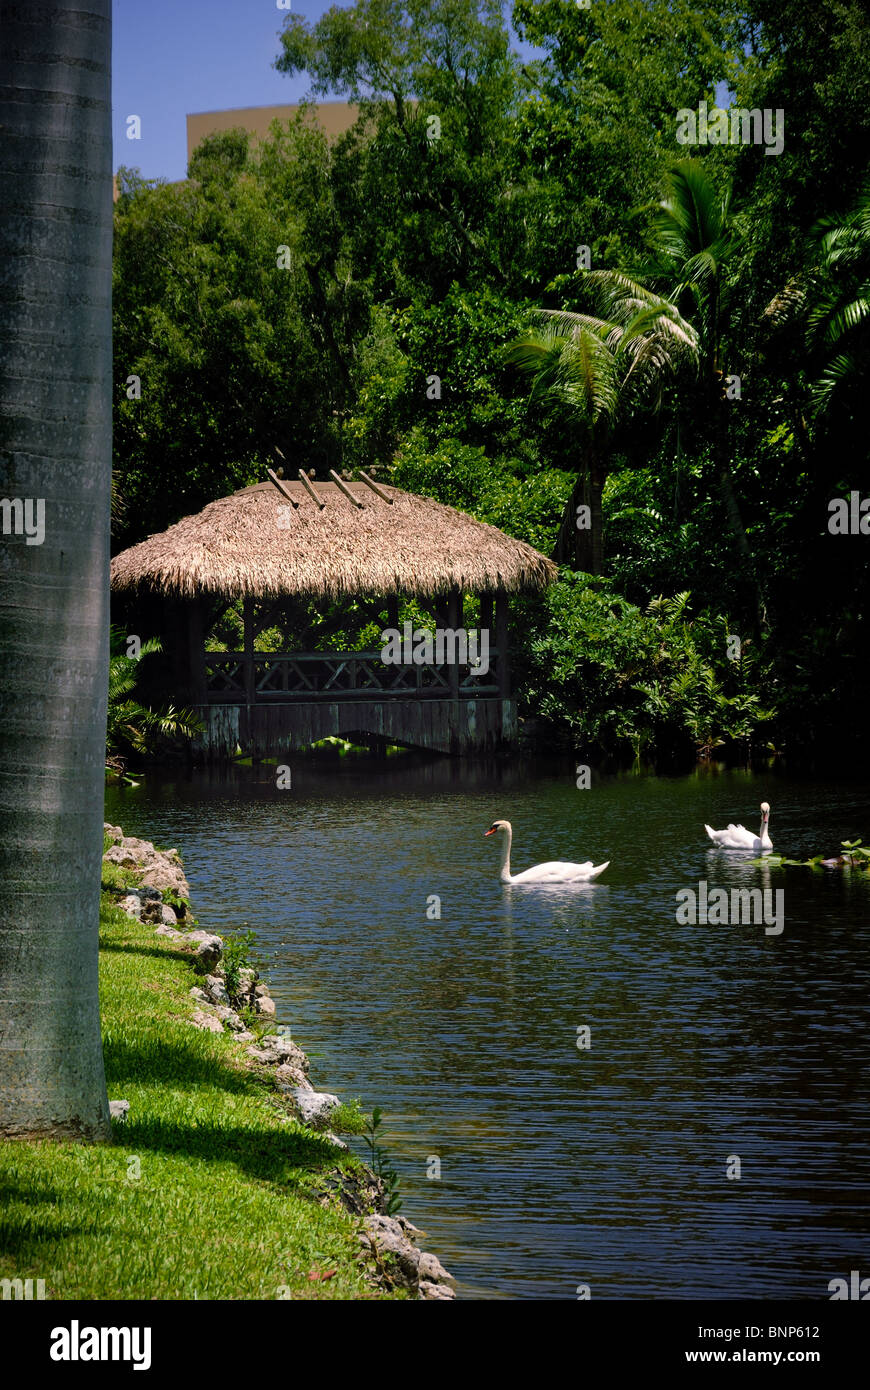 Swans on the lake at the Bonnet House, a historic home in Fort Lauderdale, Florida, United States. Stock Photo